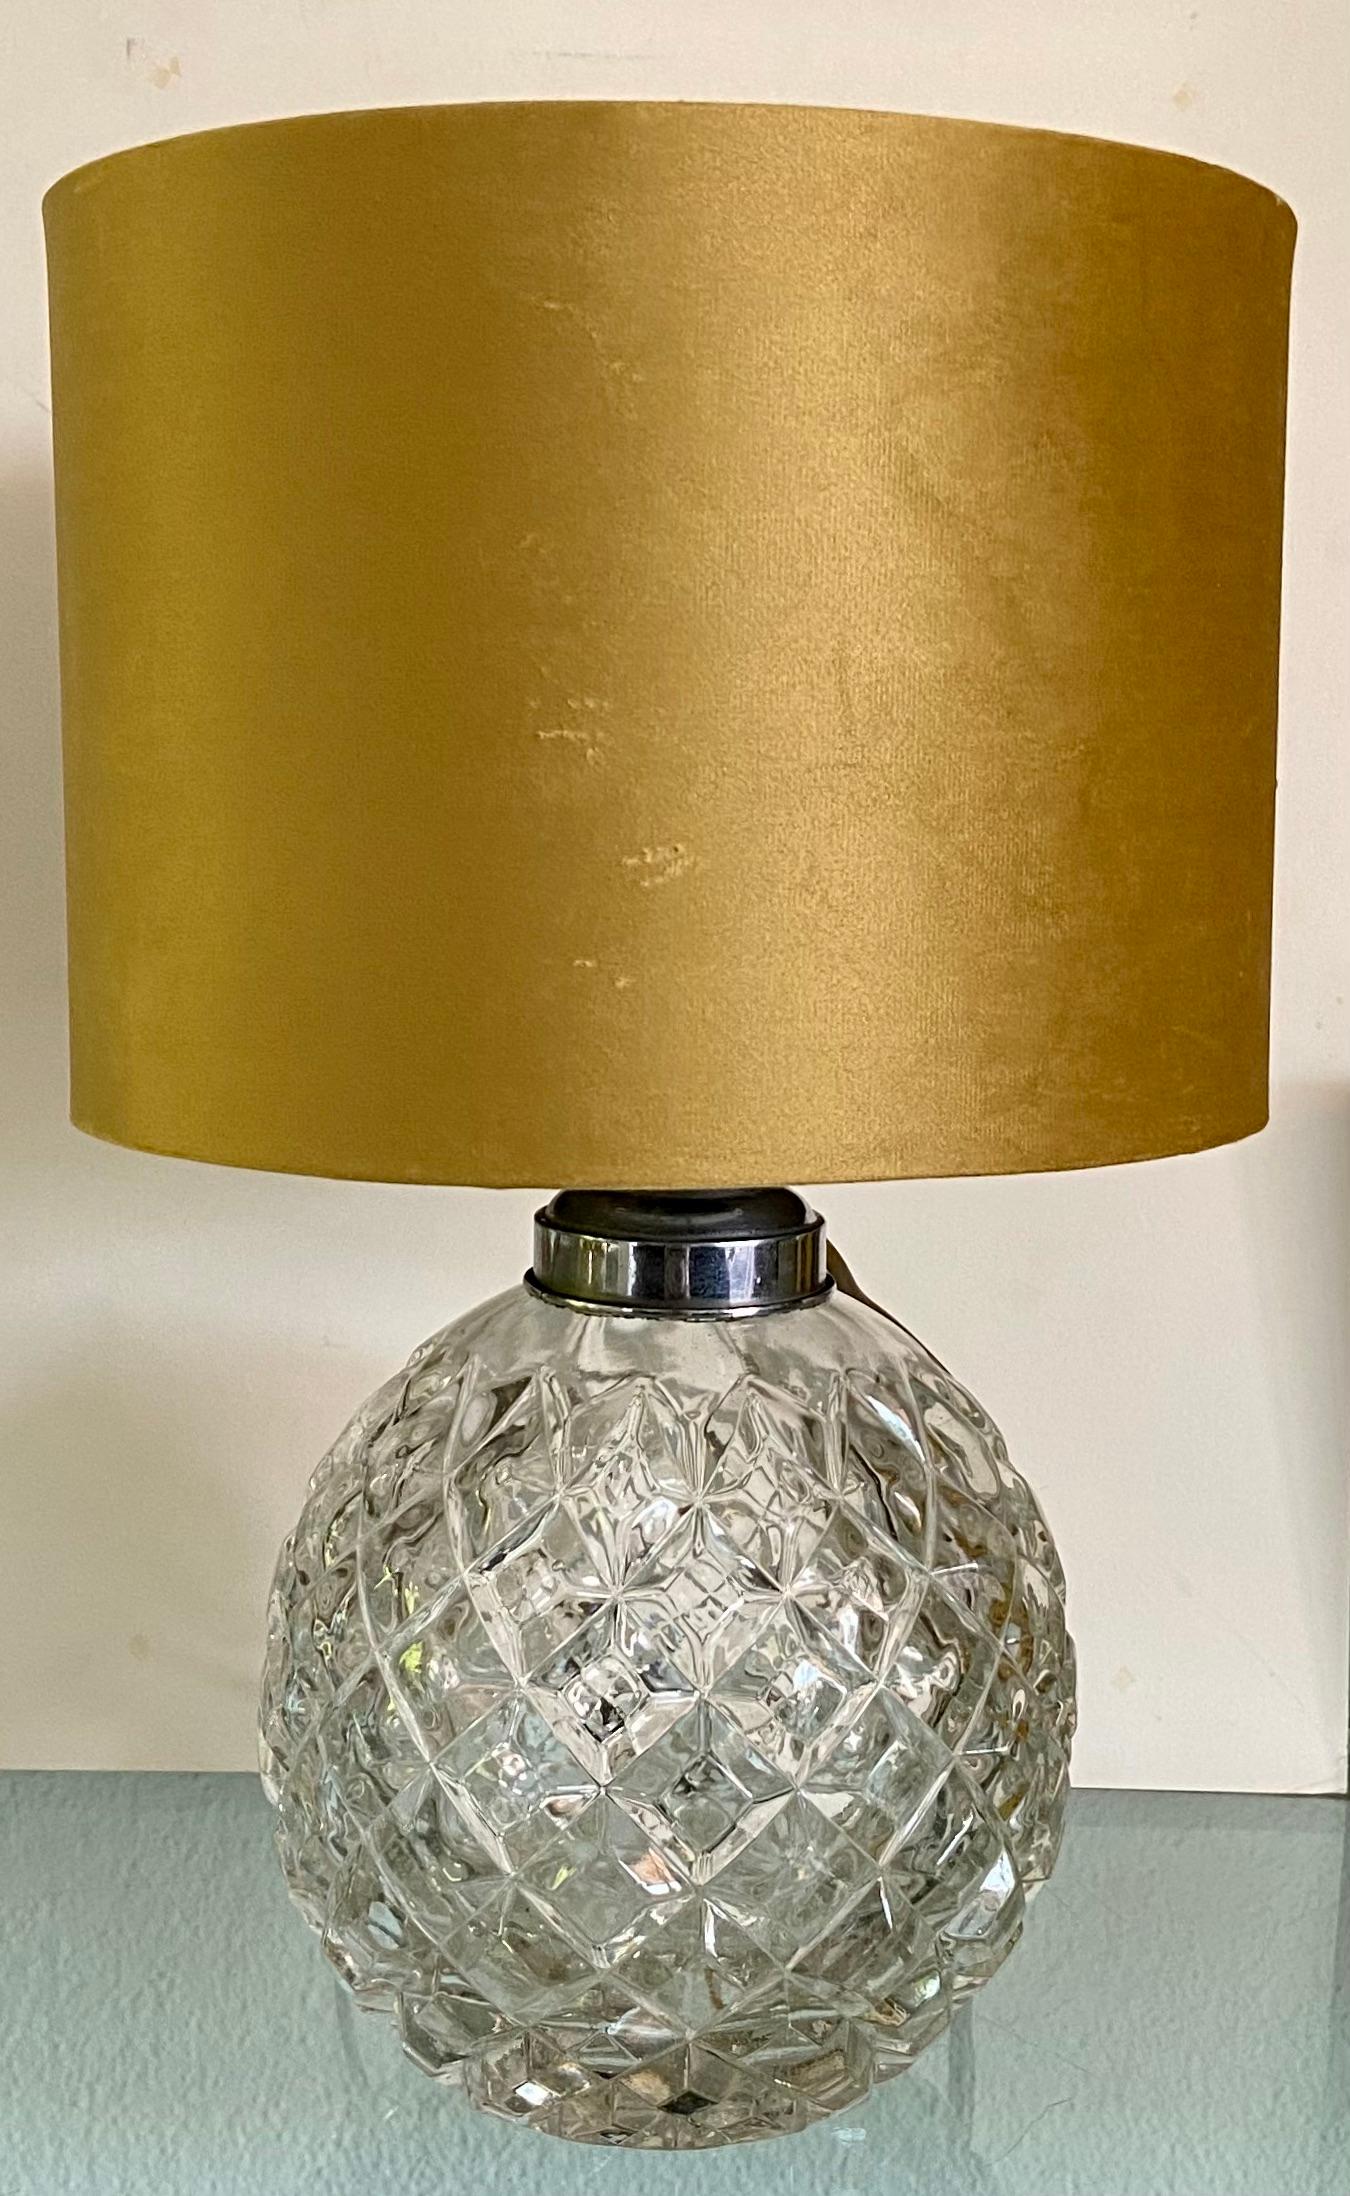 Crystal table lamp with a new shade in yellow velvet. 